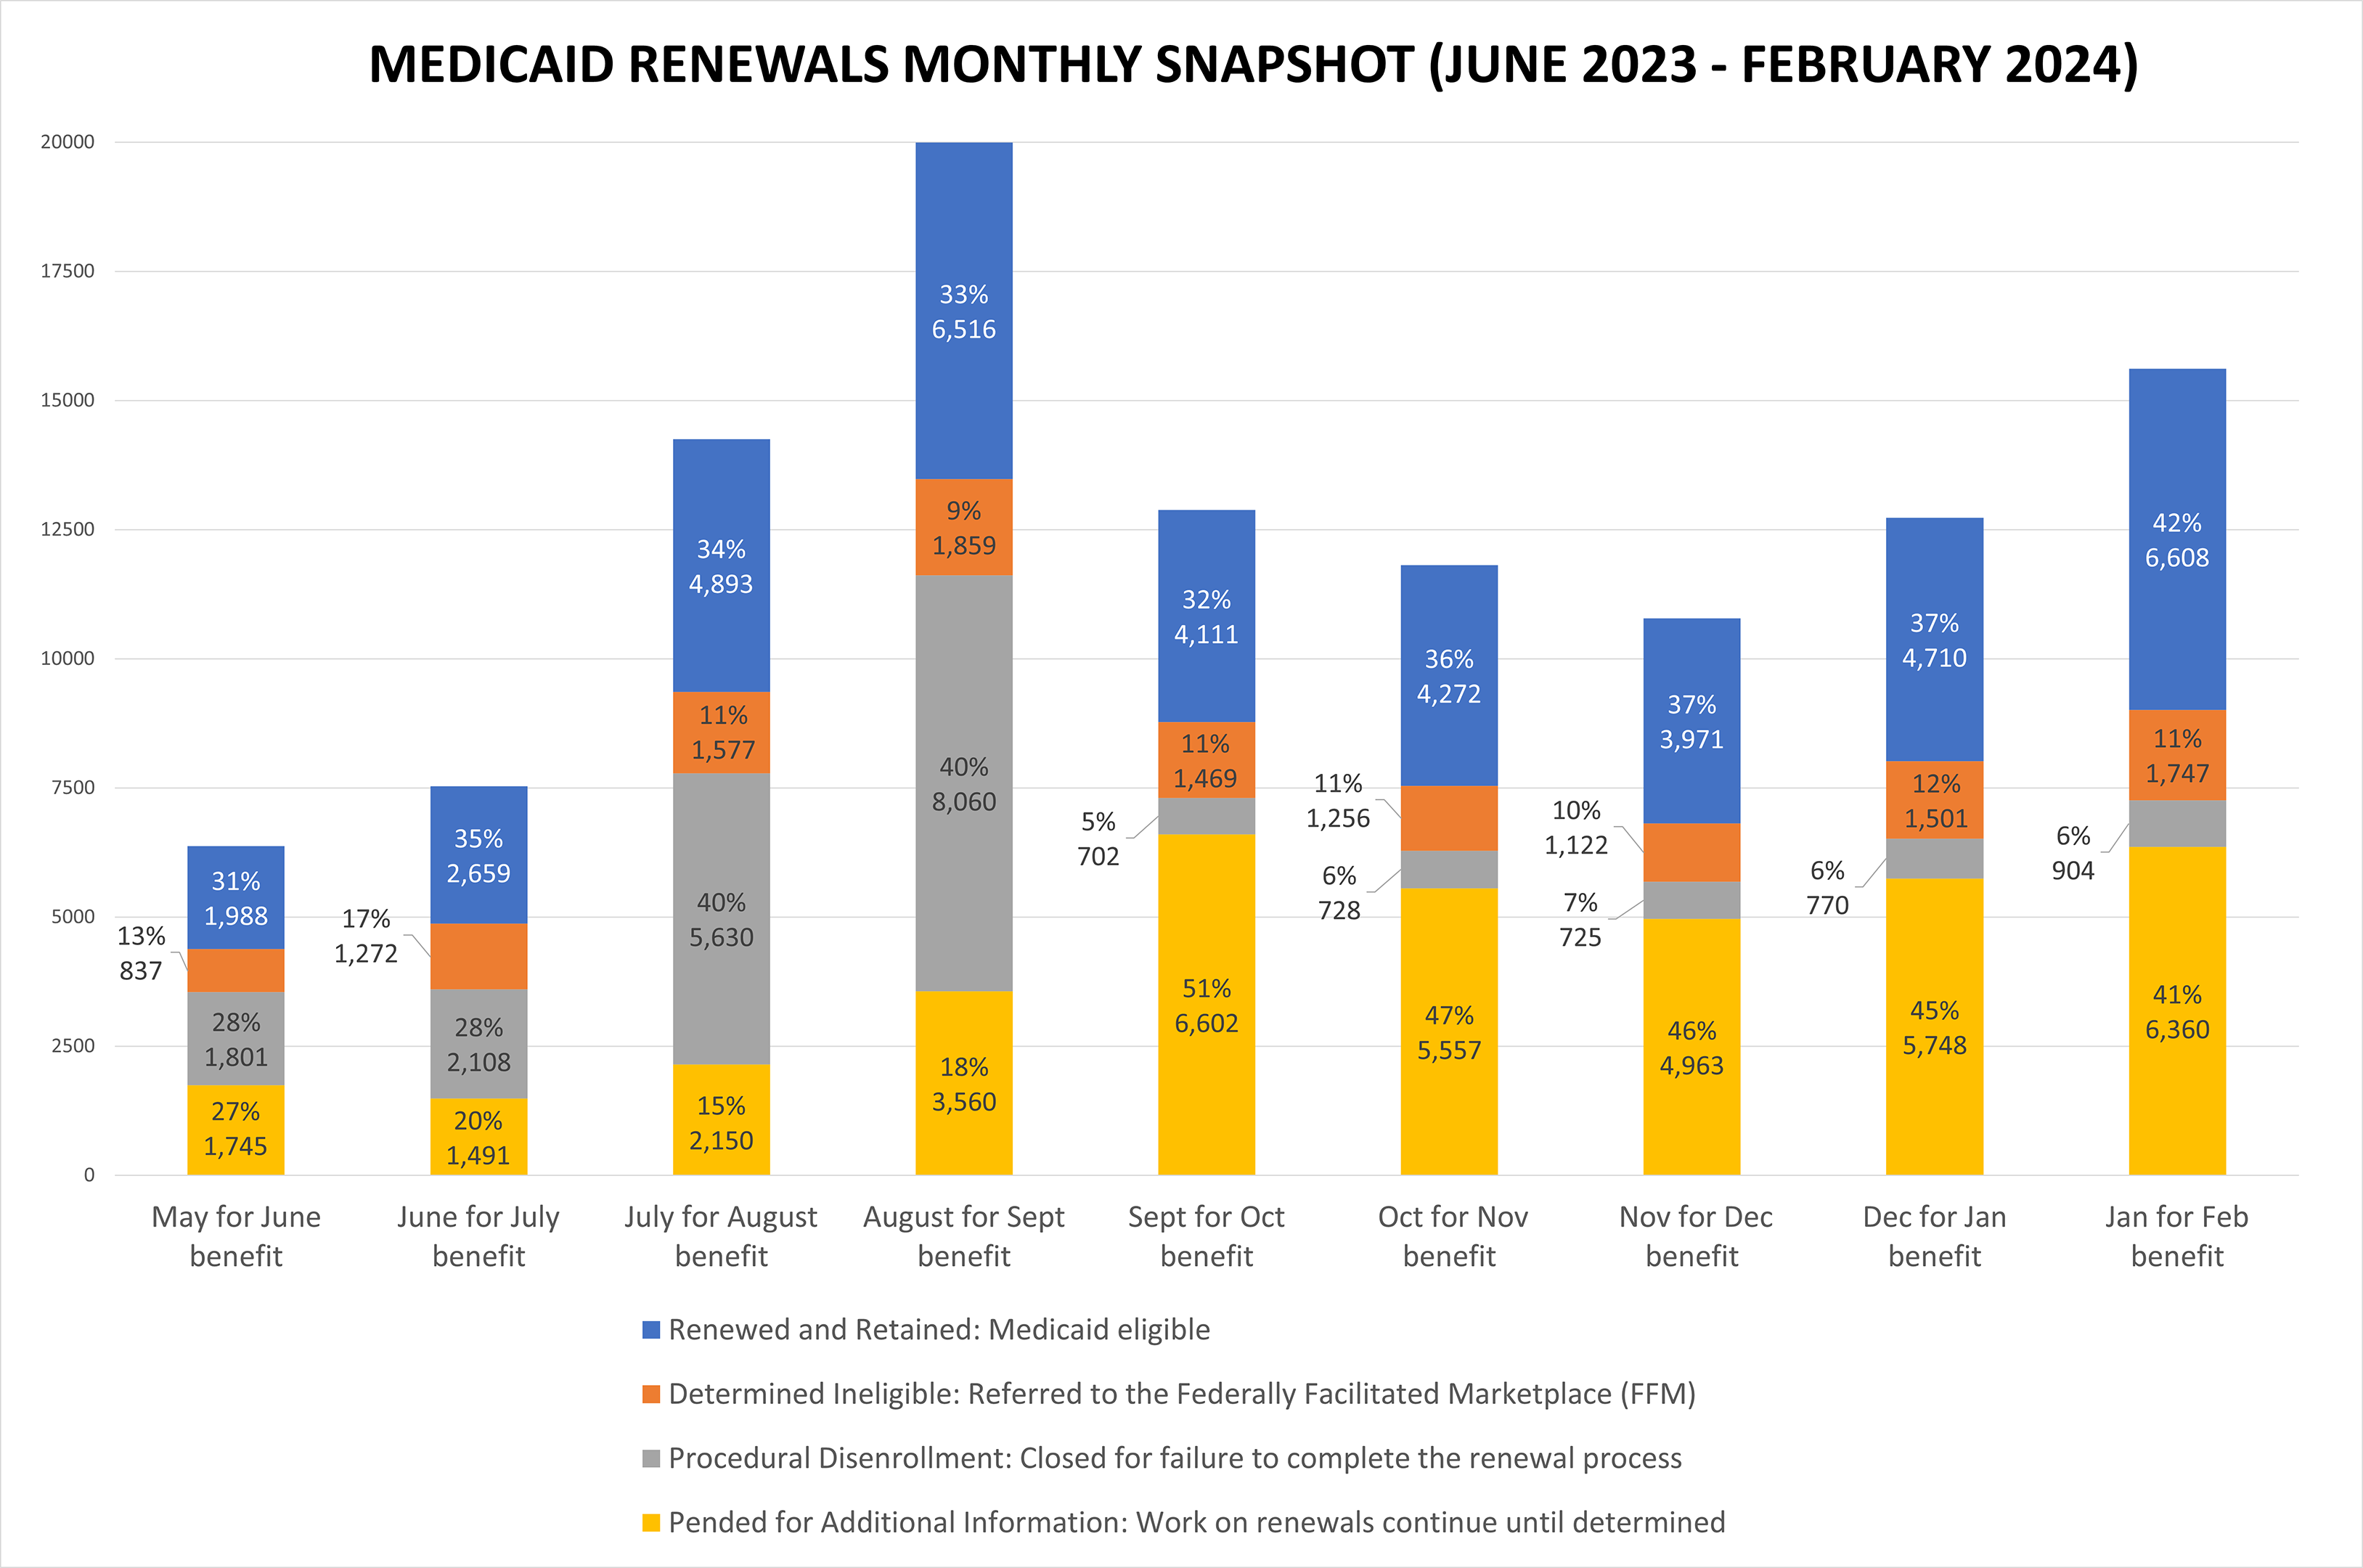 Medicaid Renewals Monthly Snapshot. Click for full size. Data replicated in archive section at the bottom of this page.